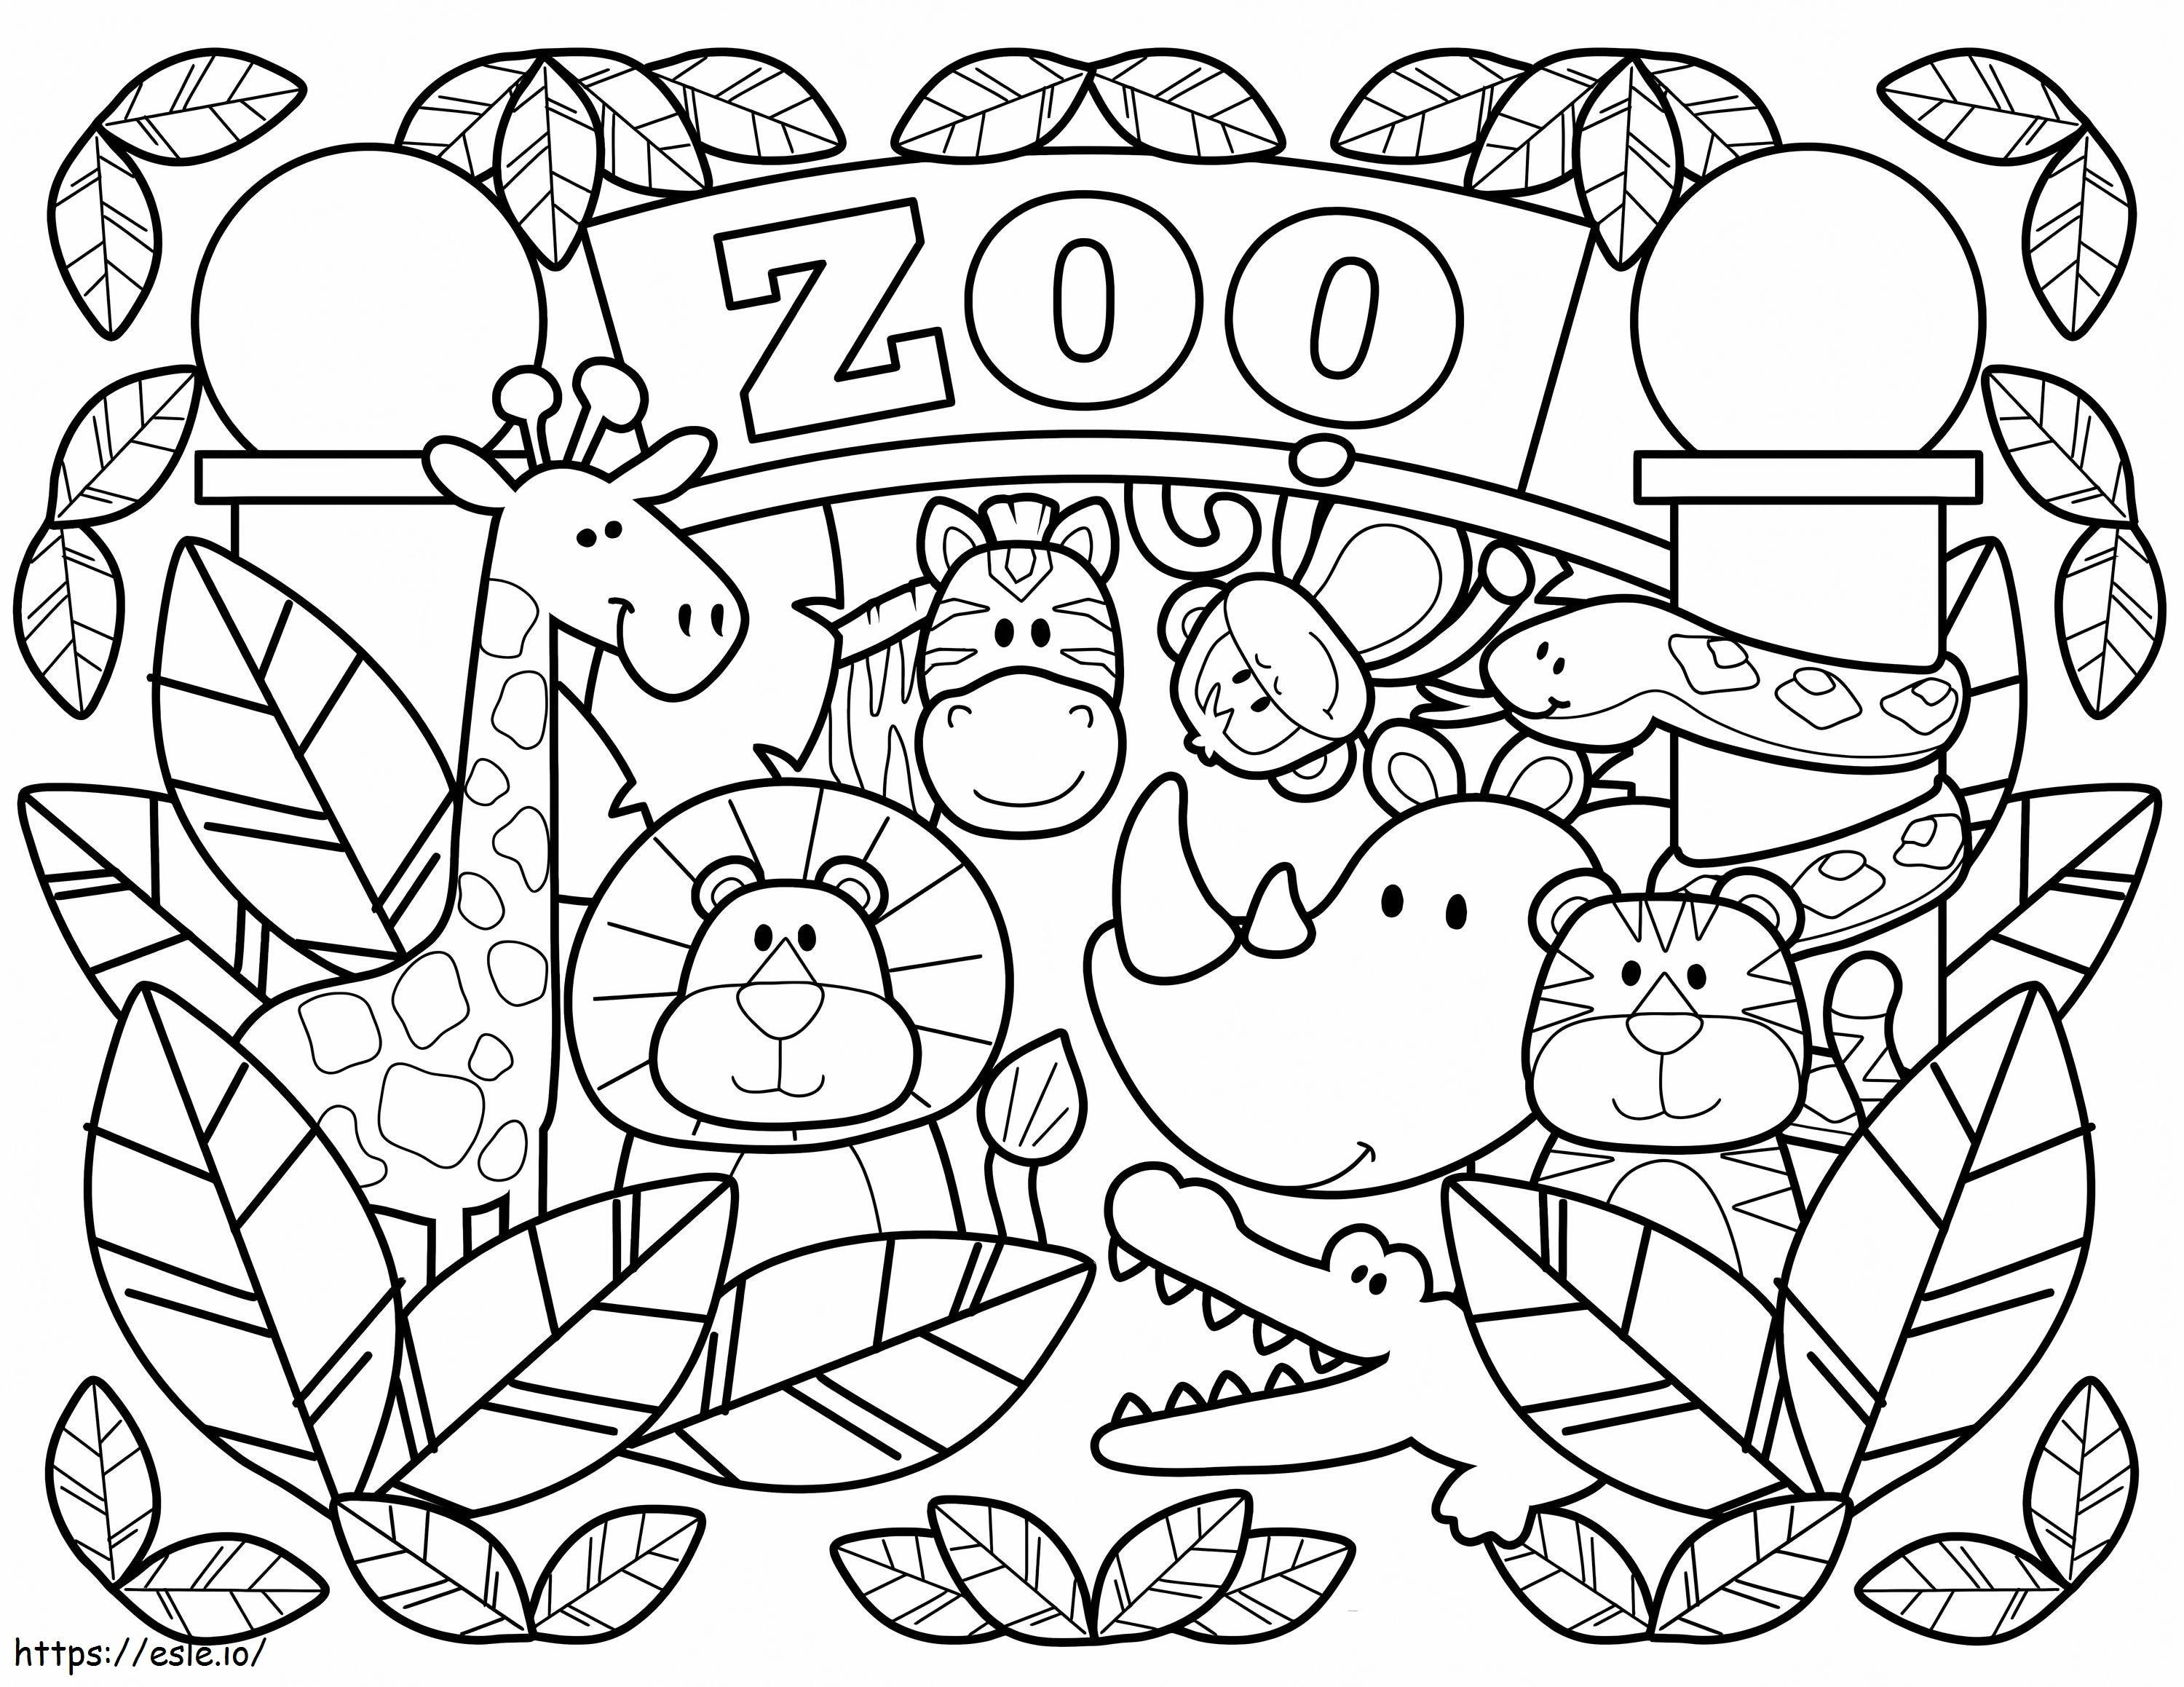 Basic Zoological coloring page